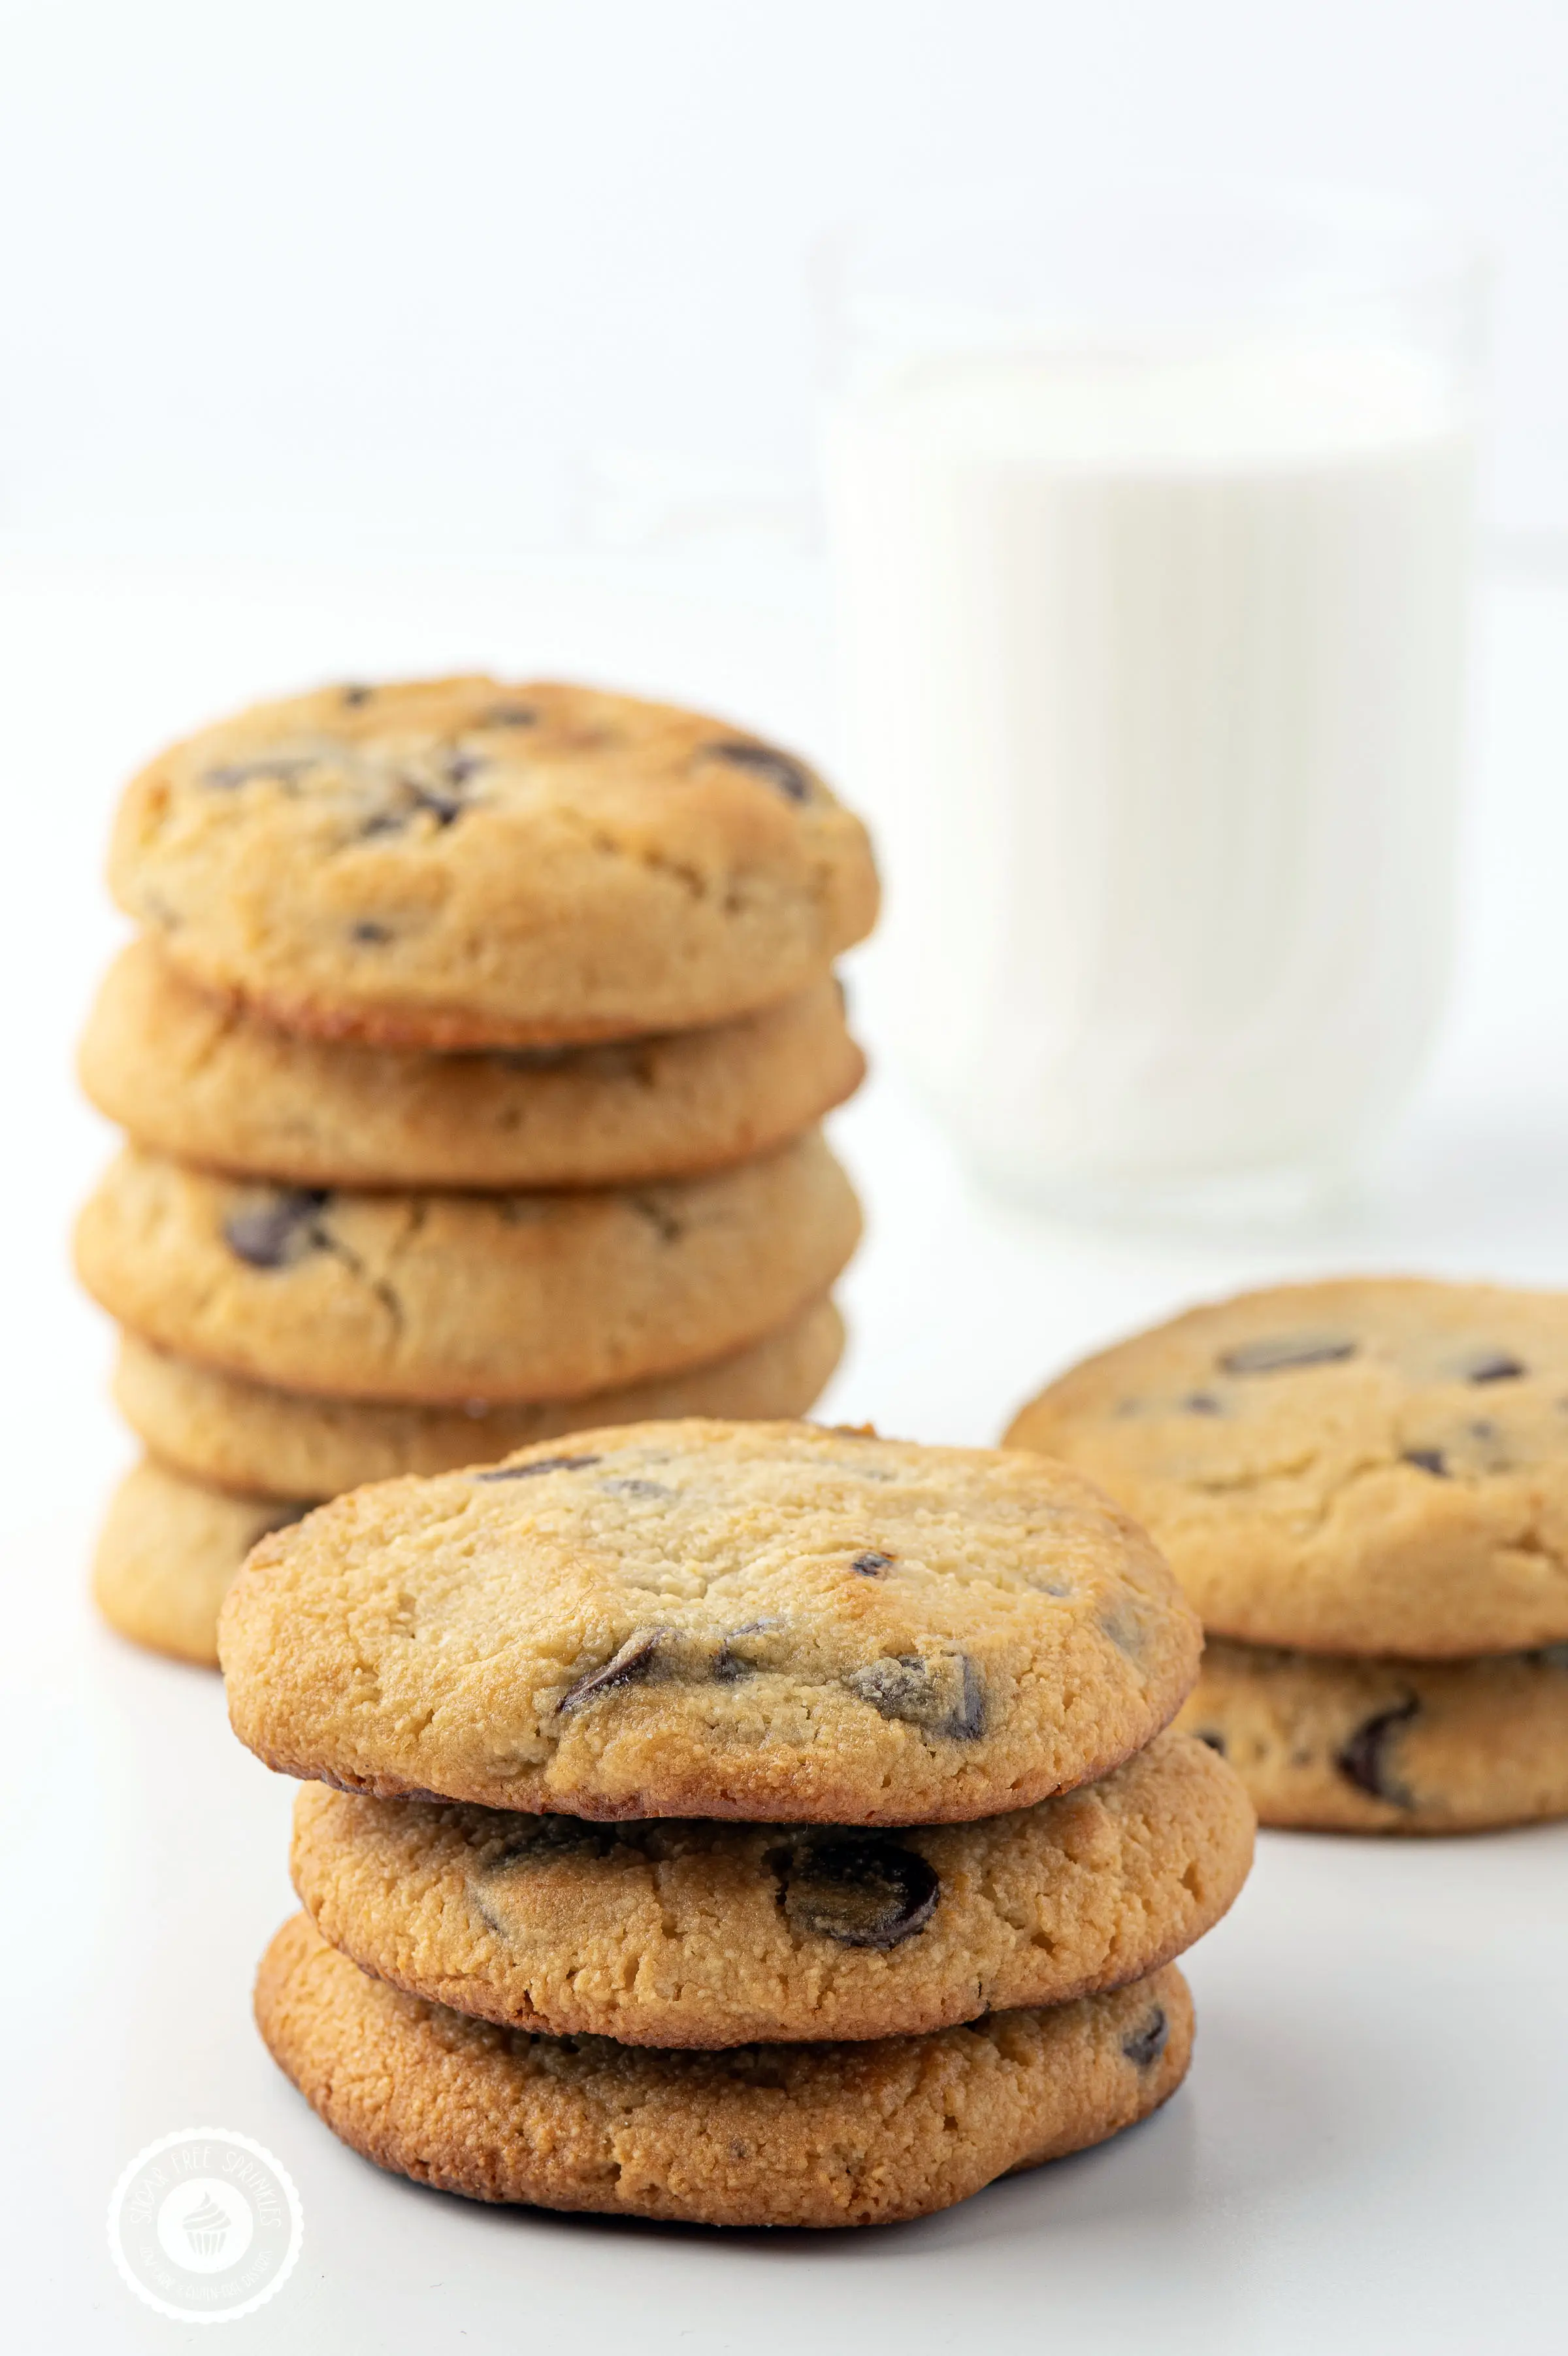 Stacks of keto chocolate chip cookies with a glass of milk.